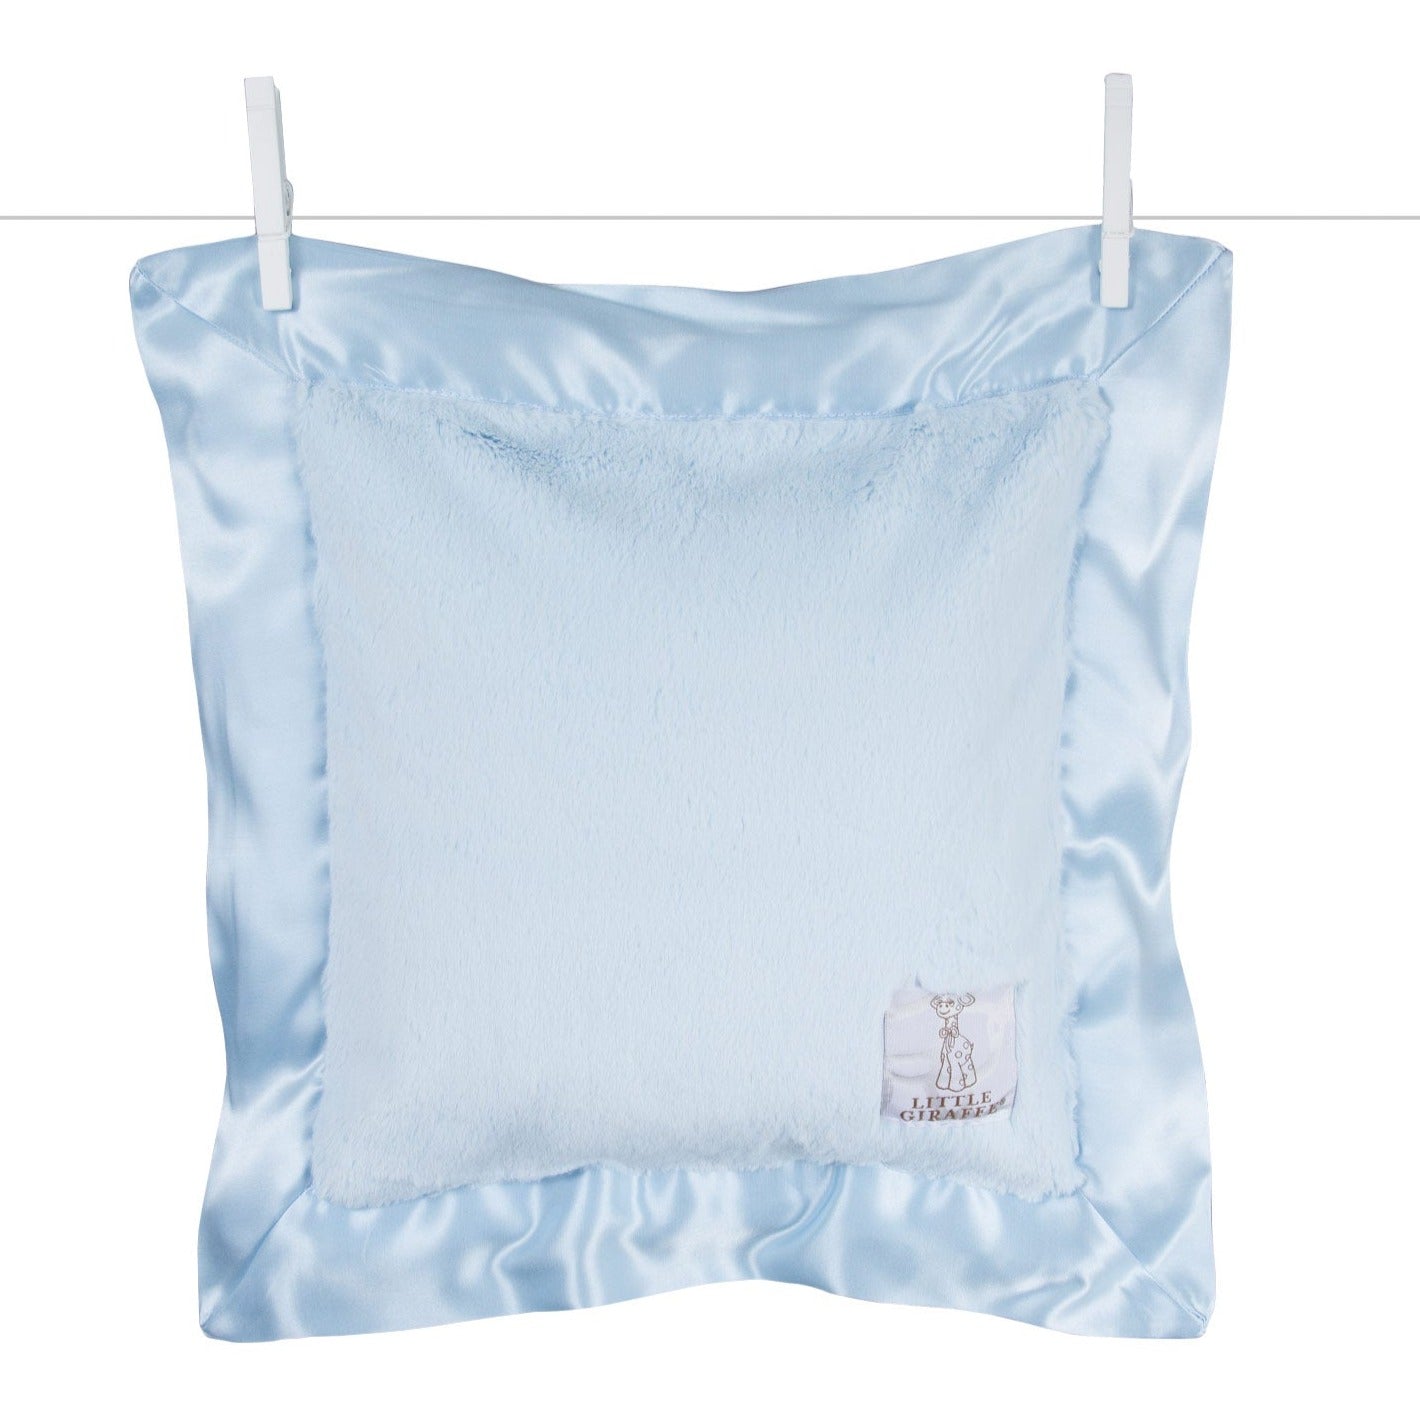  Blue Luxe™ Baby Pillow